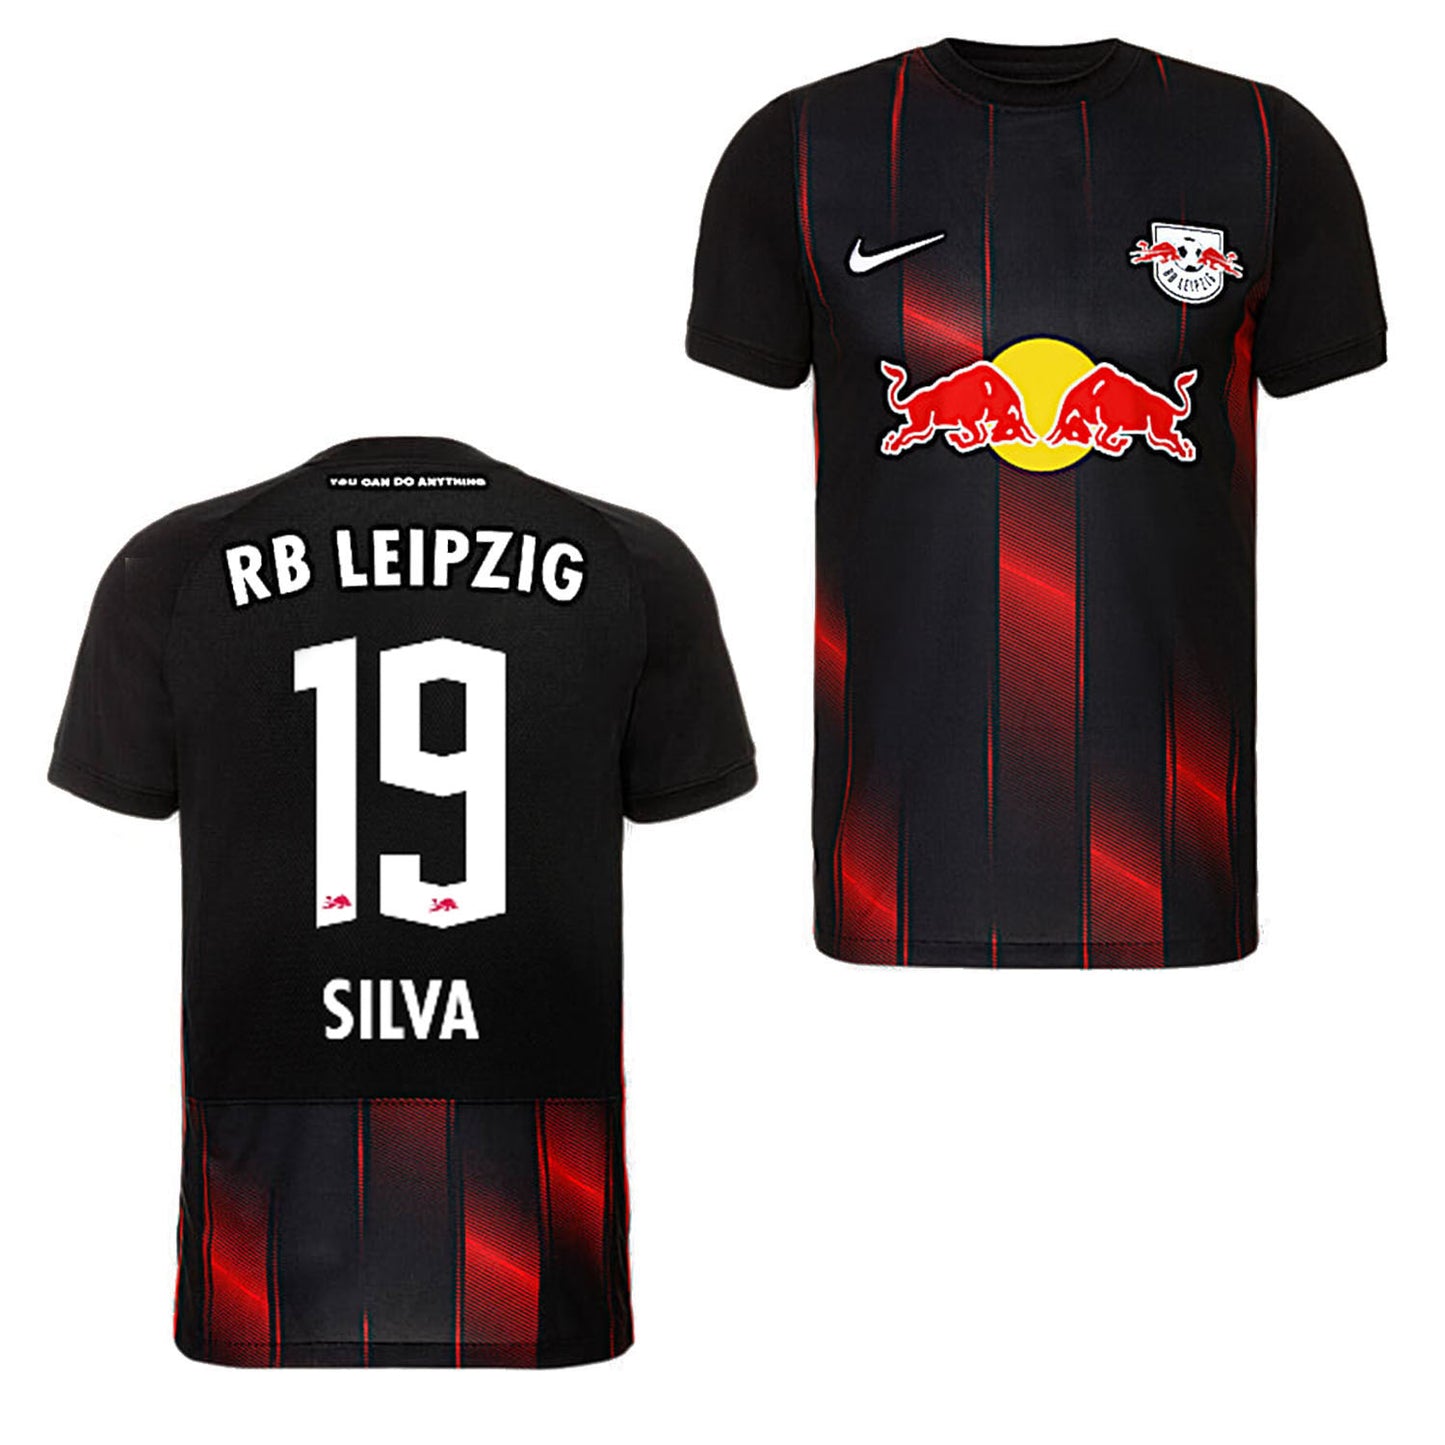 Andre Silva RB Leipzig 19 Jersey